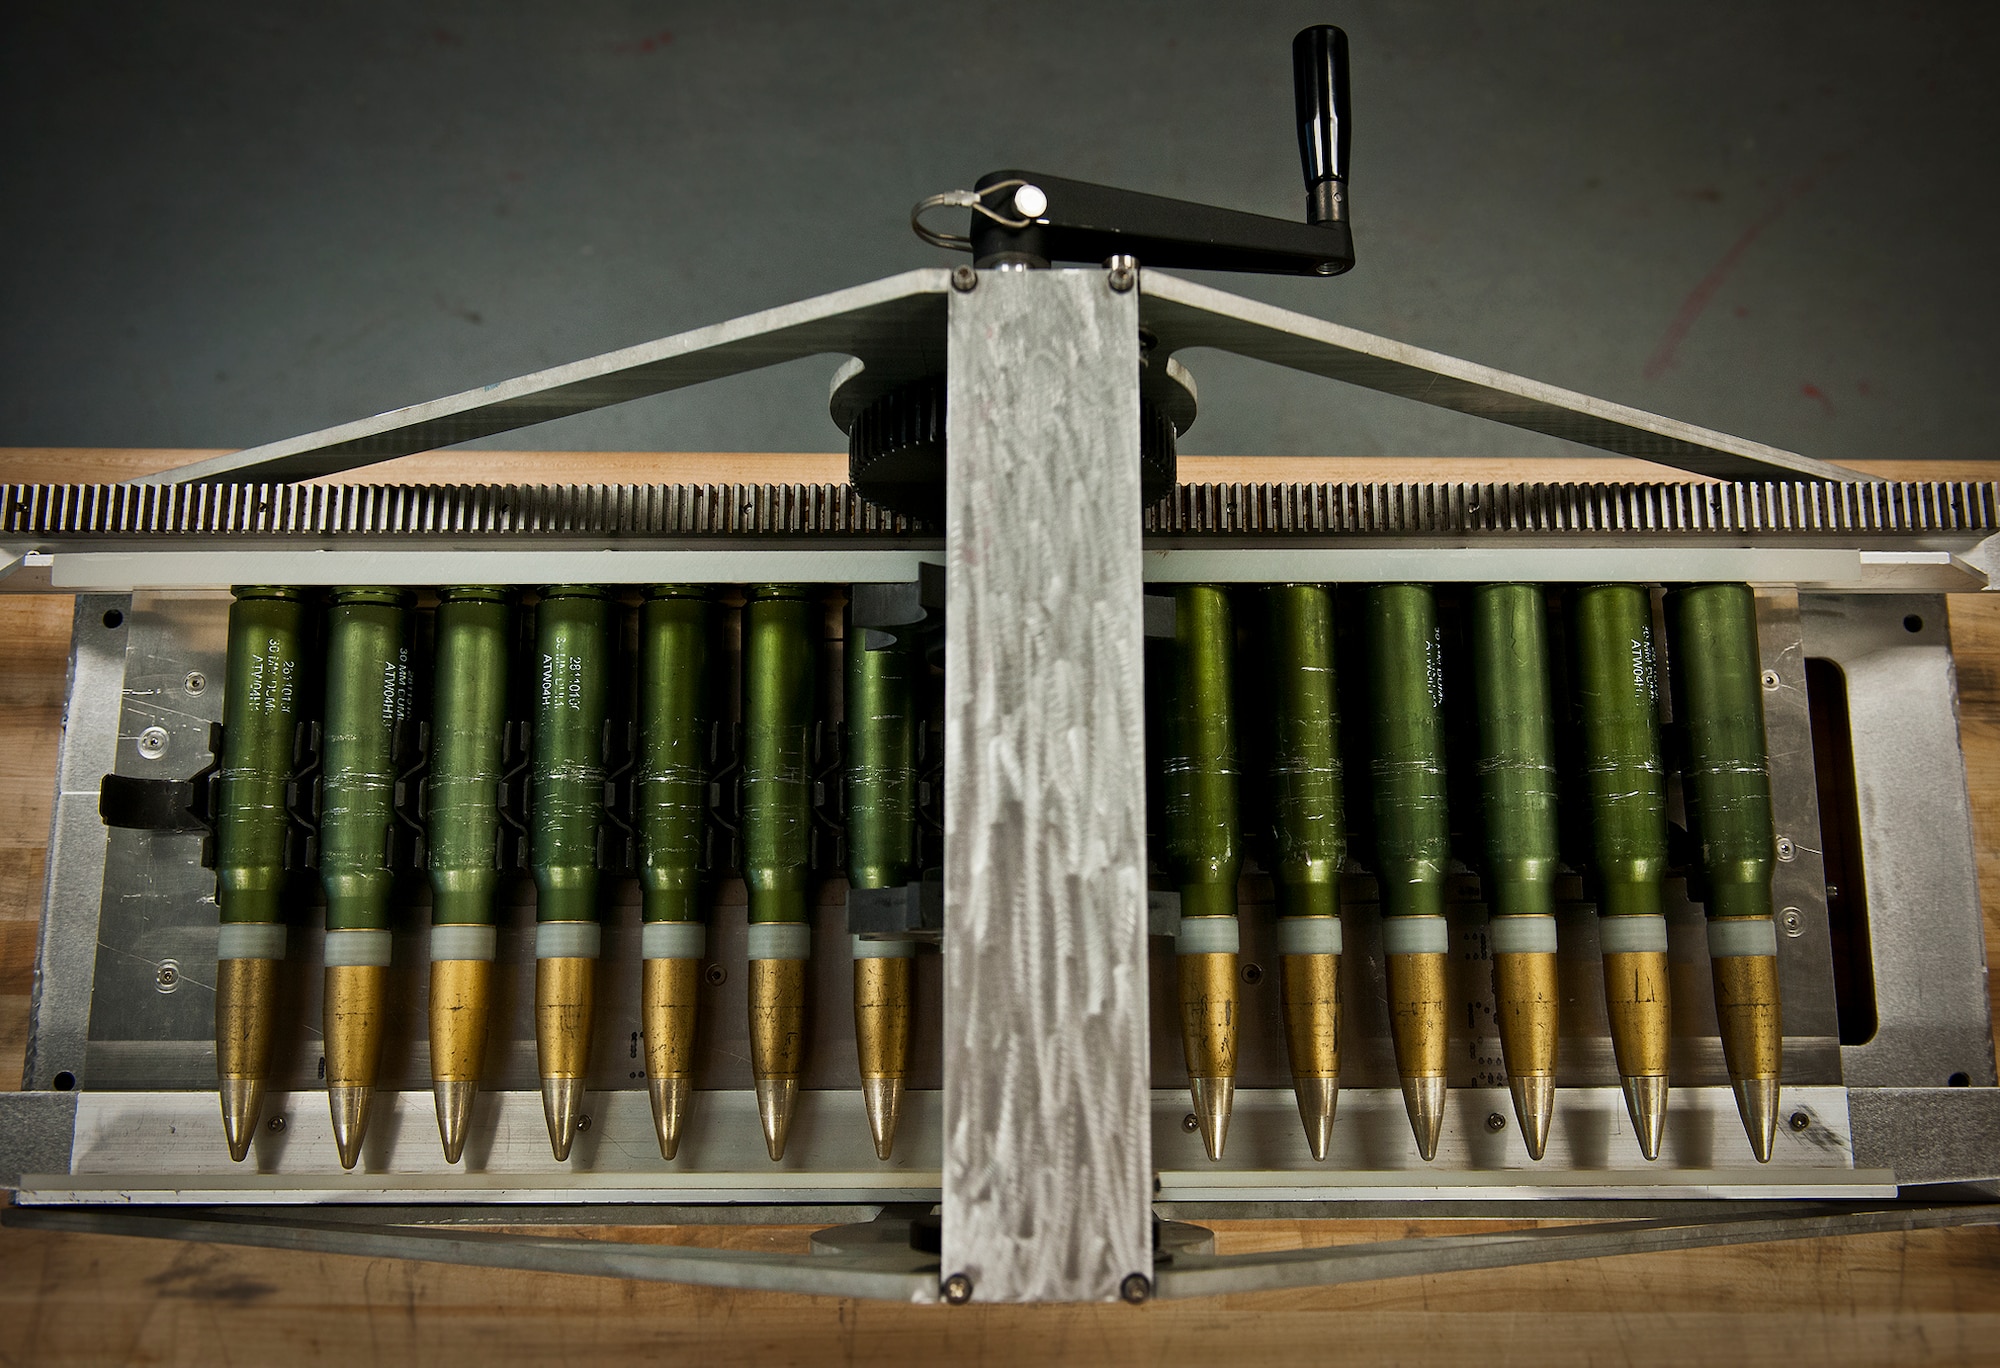 A lightweight, mobile 30mm ammunition round linker connects rounds to MK-15 links using a hand crank or a conventional electric drill.  The linker was created by the Munitions Materiel Handling Equipment Focal Point, a section under the Air Force Life Cycle Management Center’s Armament Directorate, specializing in developing locally manufactured equipment for the Air Force ammo and weapons communities.  The new linker is one-tenth the weight and cost of the current ammo linker in use and will be delivered to Air Force Special Operations Command units in May.  (U.S. Air Force photo/Samuel King Jr.)